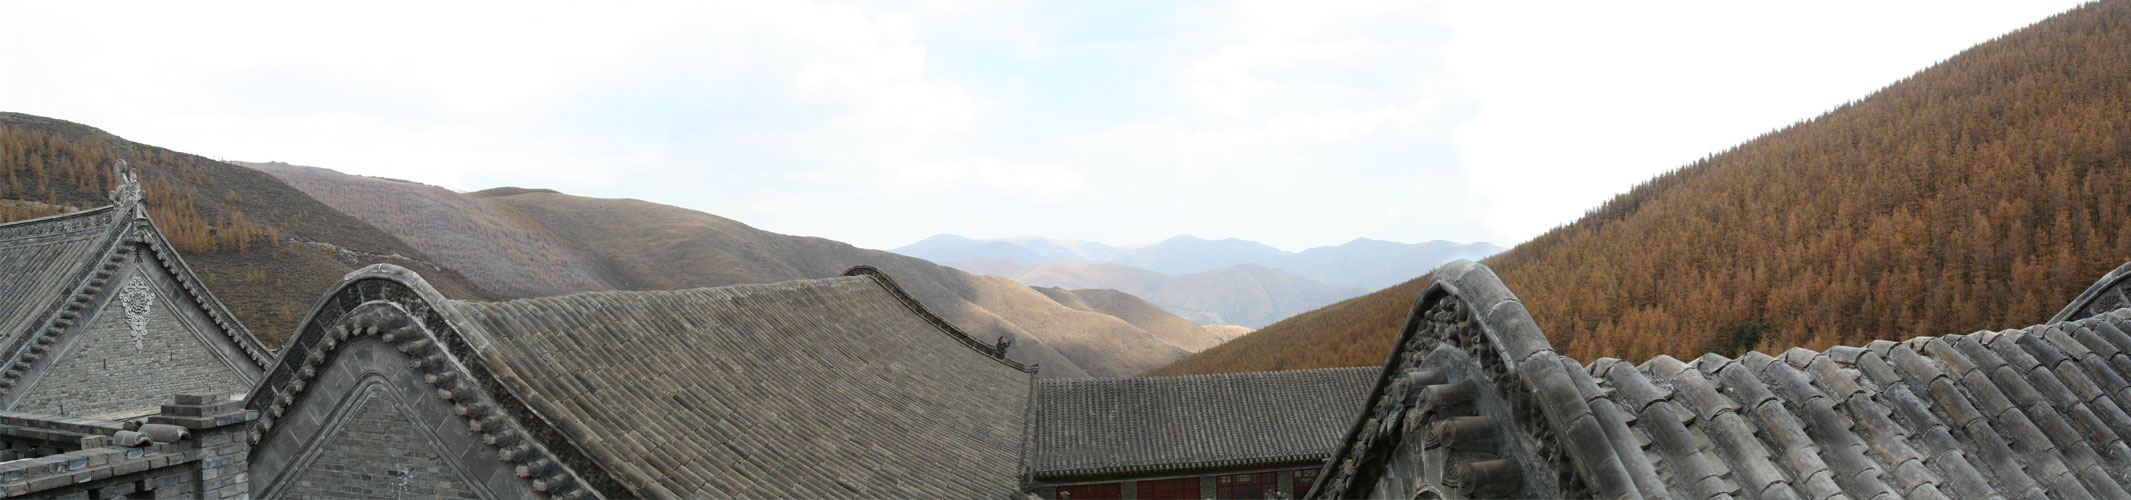 Roof of China